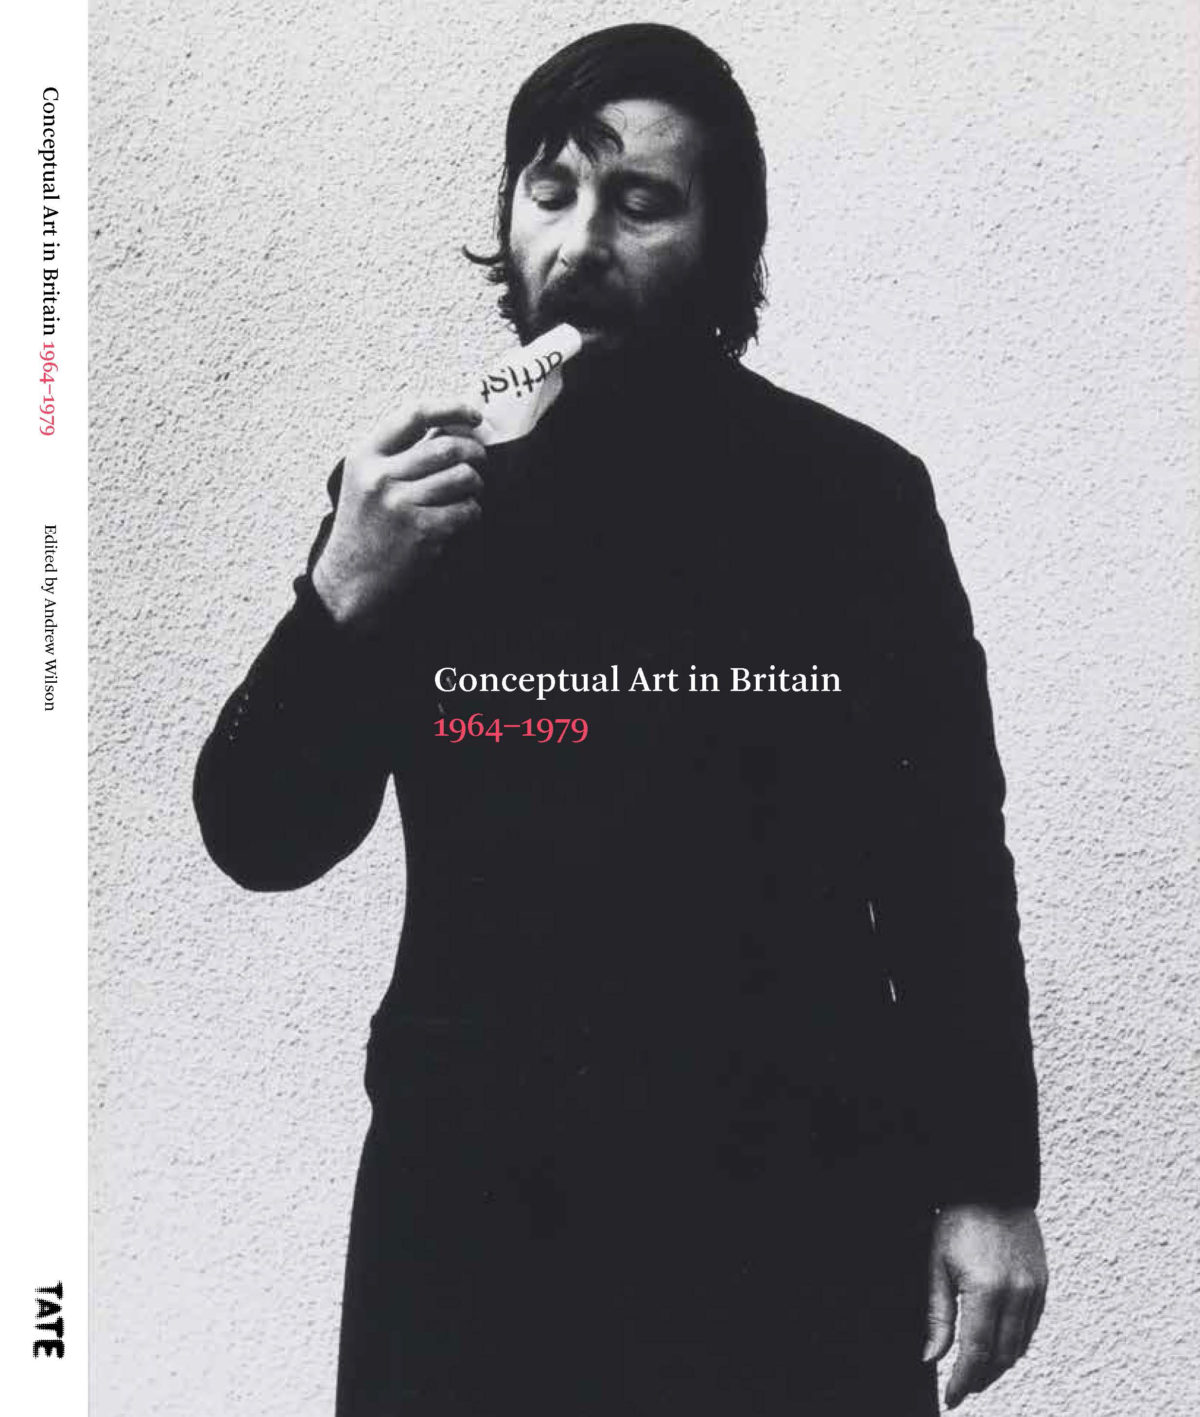 2015 – ‘To Pour Milk Into A Glass’ (In: Conceptual Art in Britain, 1964-1979, Tate Publishing, 2015)